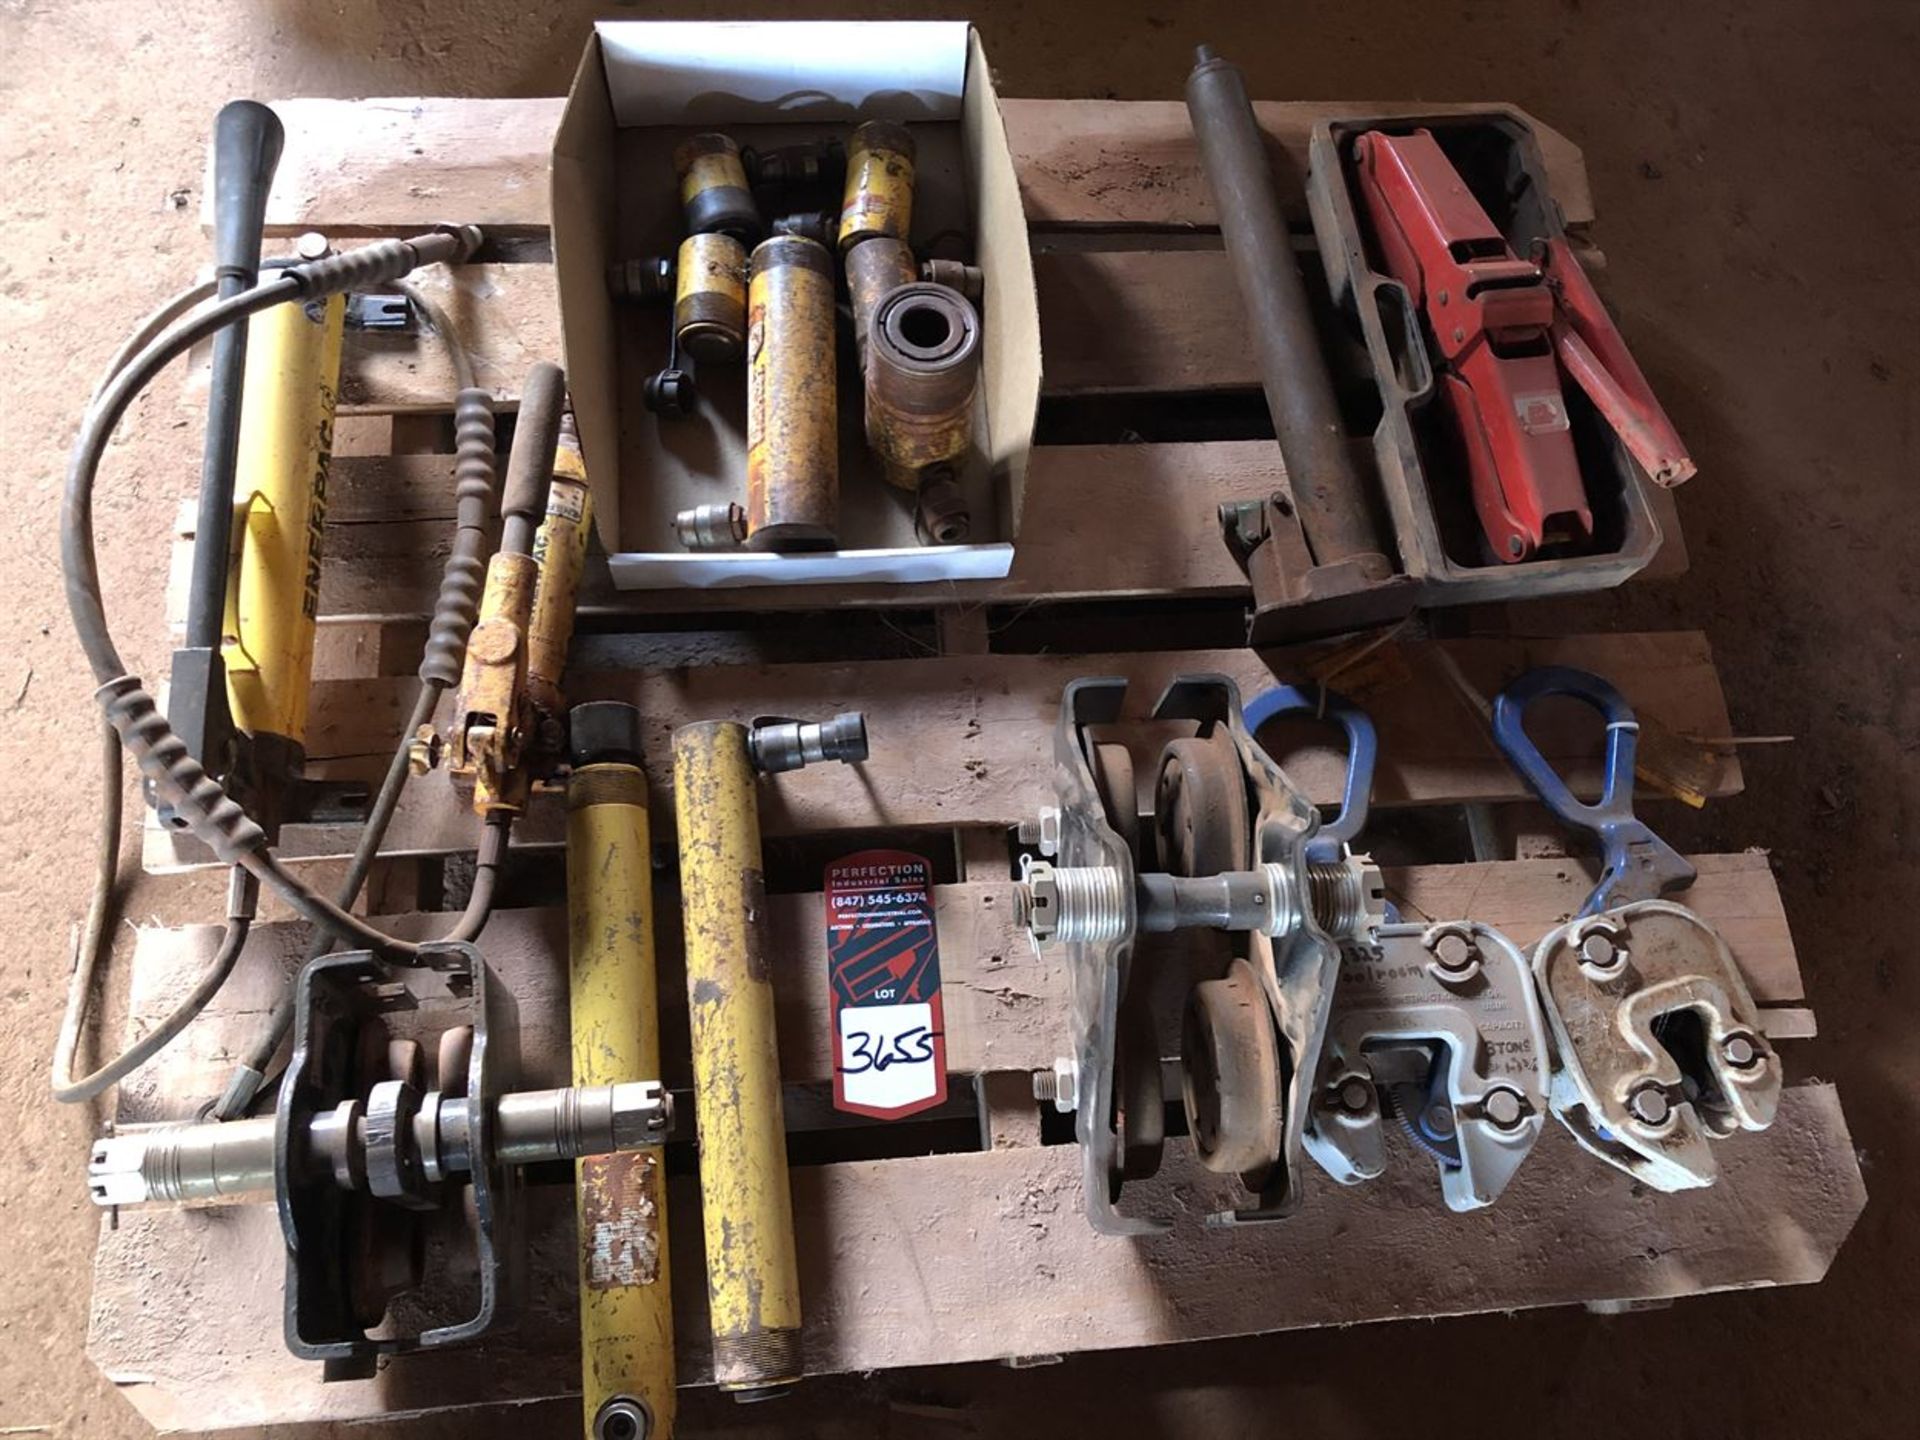 Lot Comprising of ENERPAC Hydraulic Pumps, w/ Rams, Trolleys, and Sheet Lifters (Location: Bearing